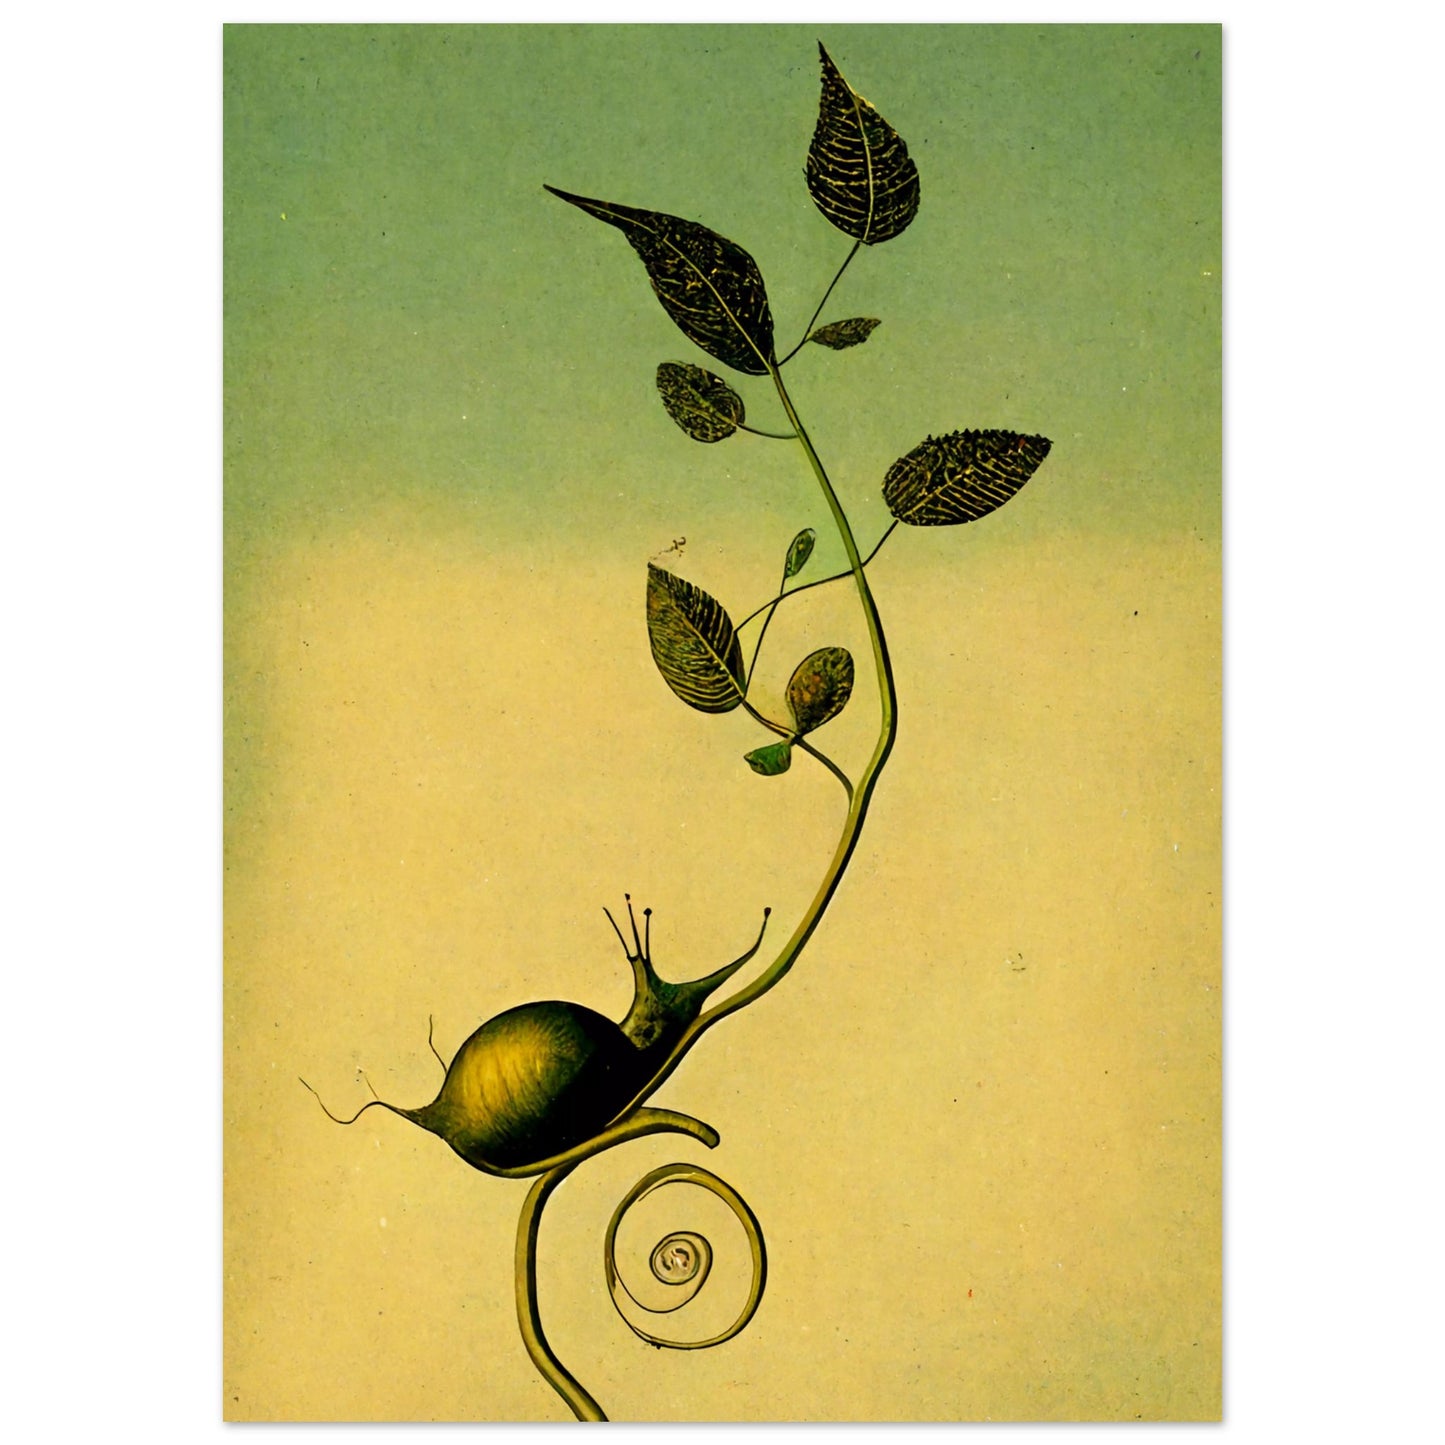 Snail In Nature Poster